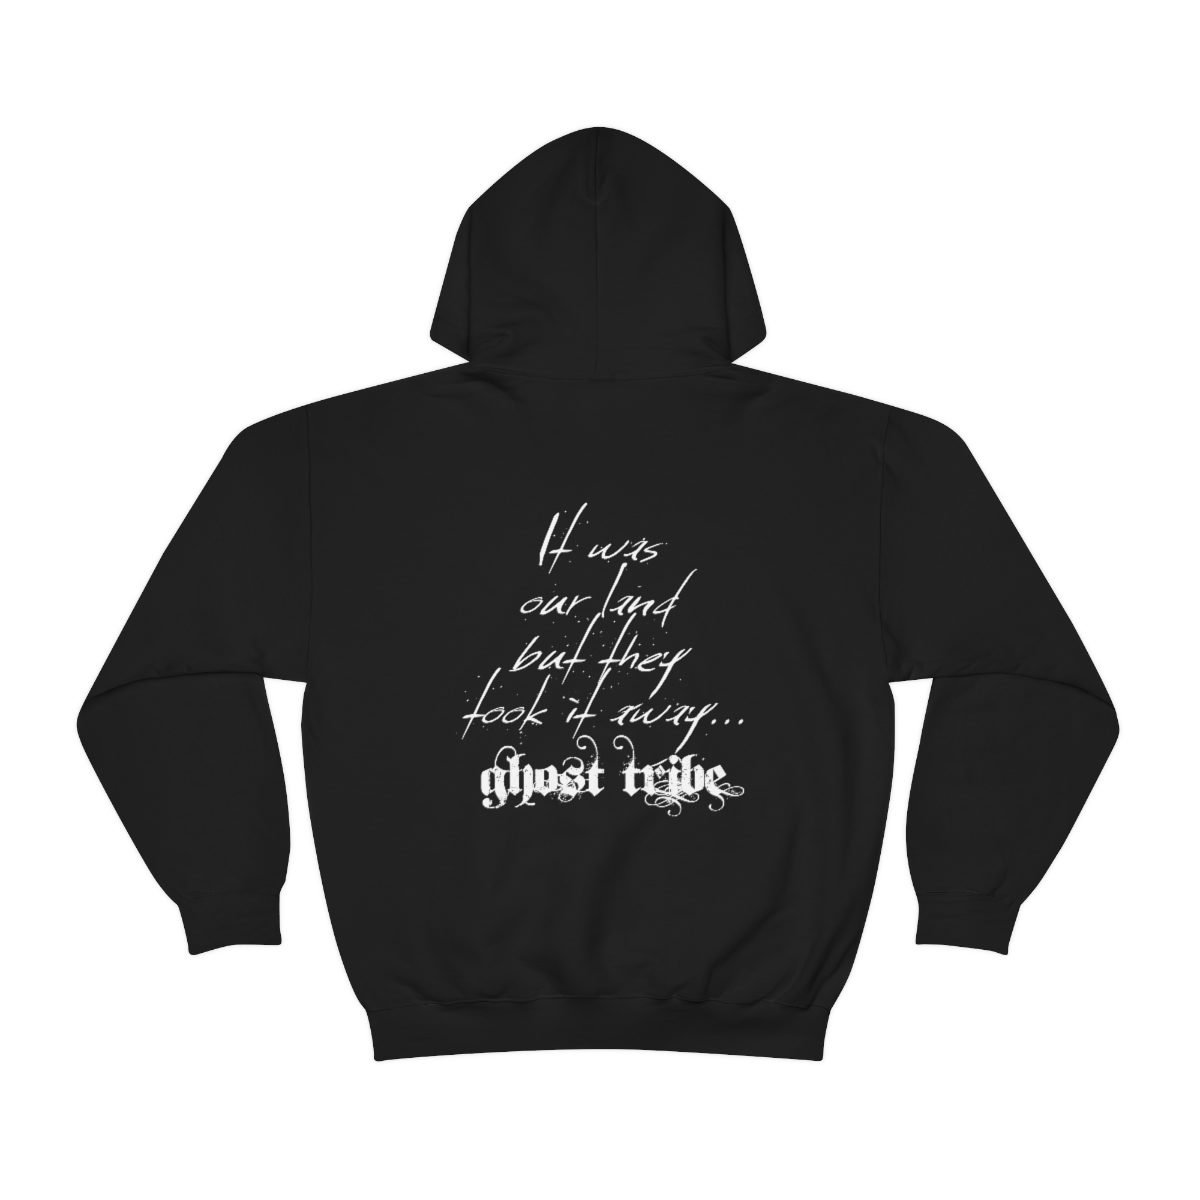 Once Dead Our Land Pullover Hooded Sweatshirt